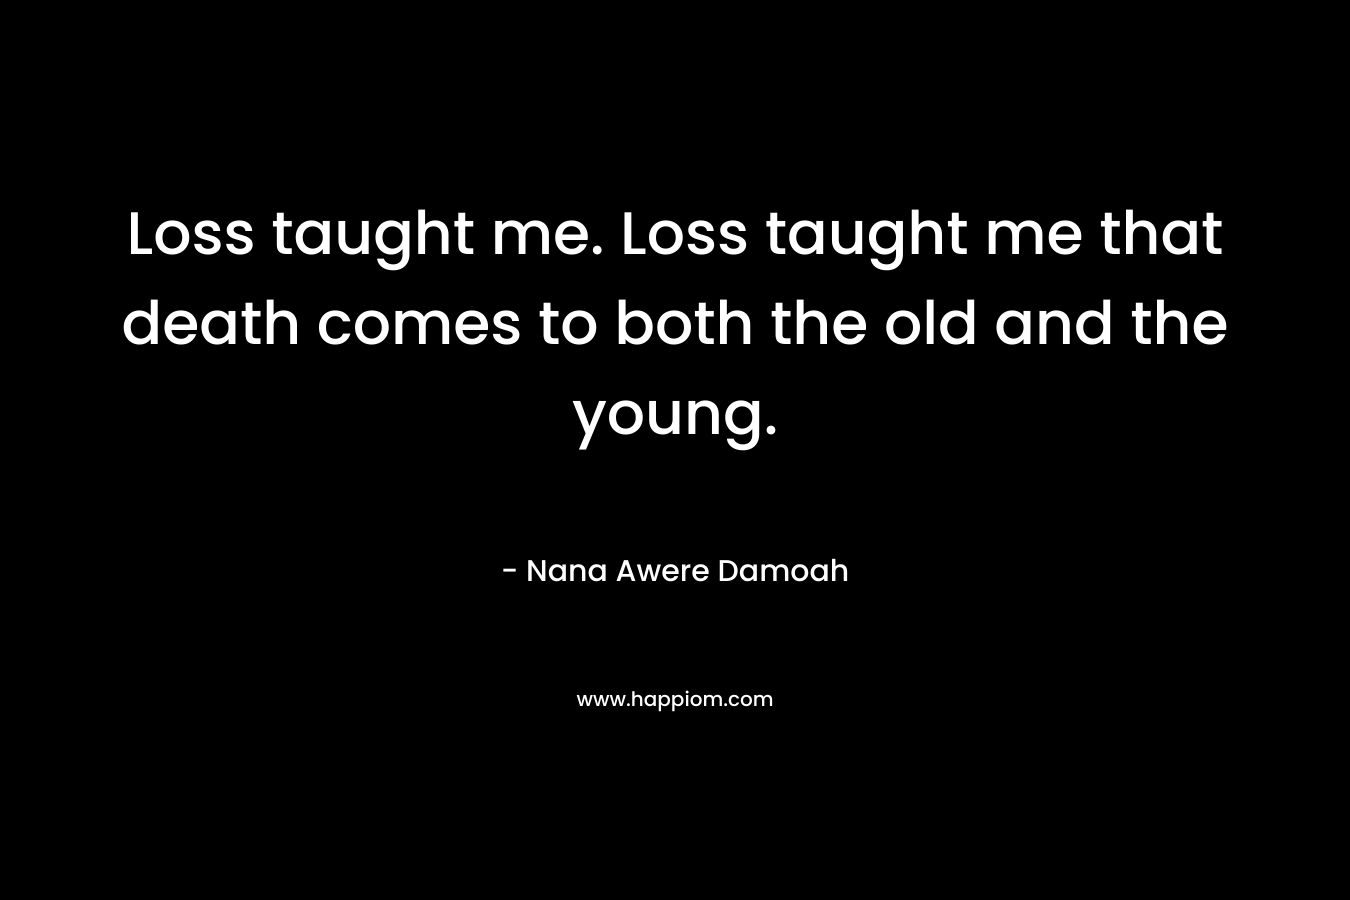 Loss taught me. Loss taught me that death comes to both the old and the young. – Nana Awere Damoah